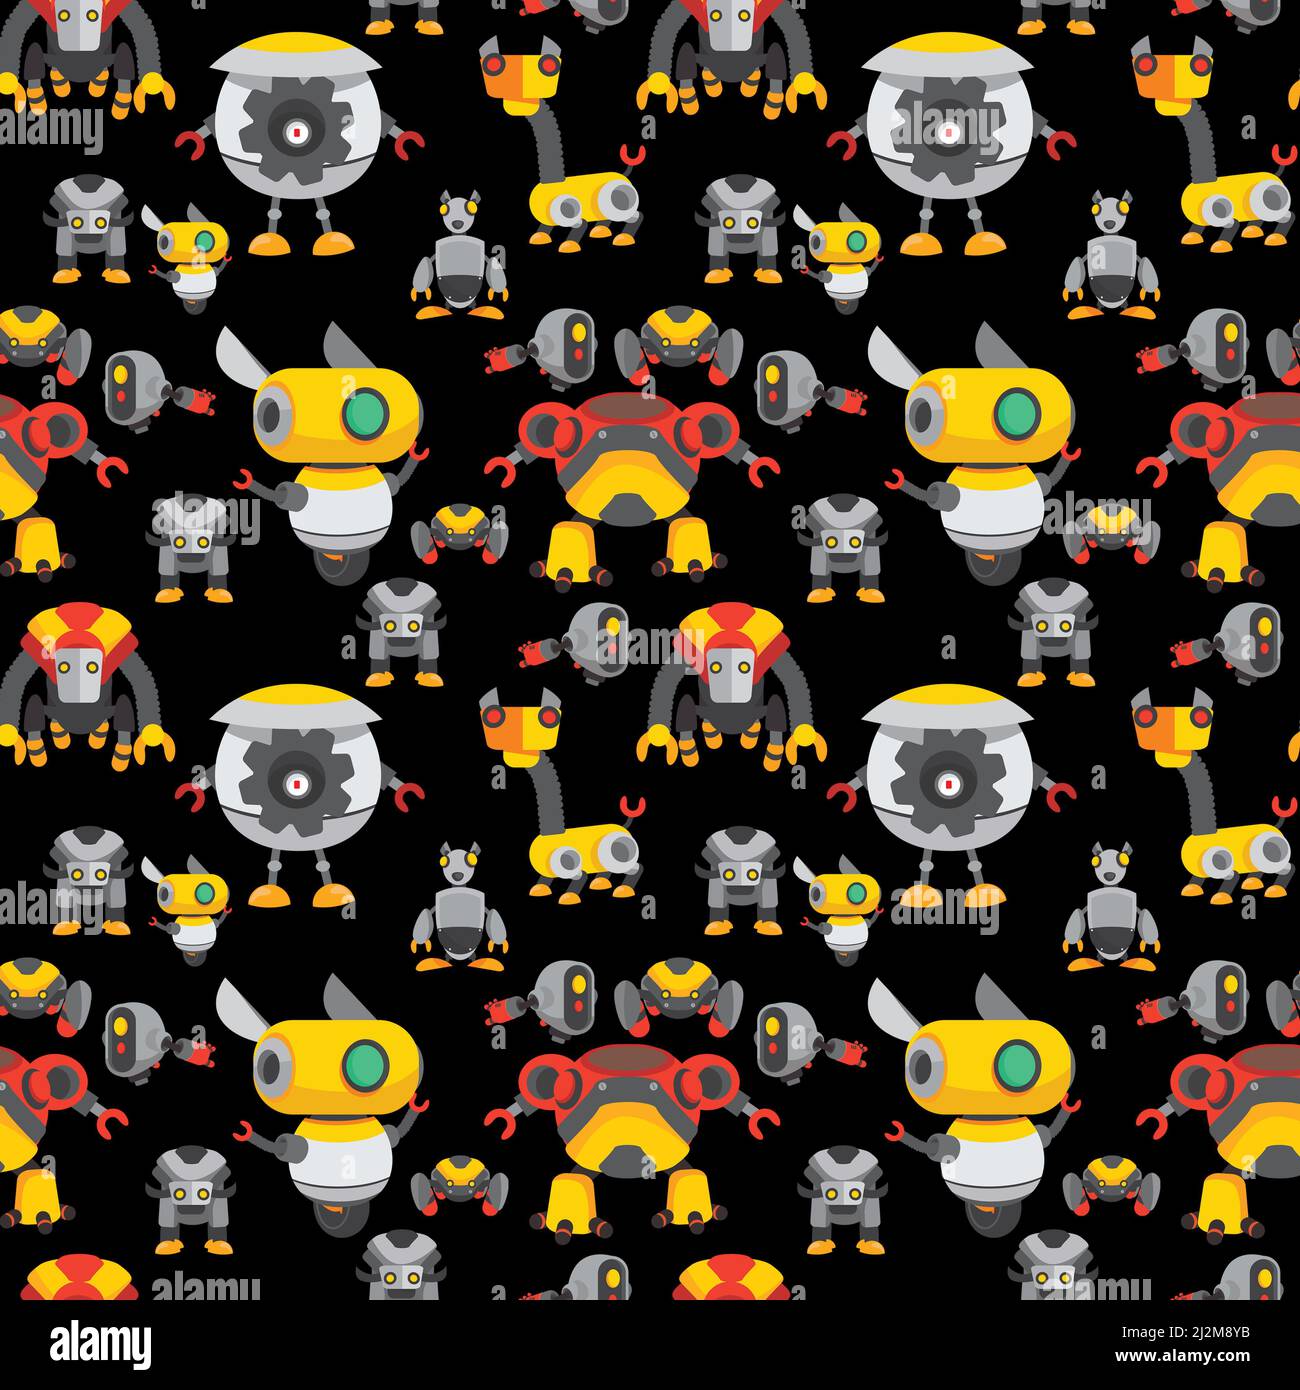 Robot repeat pattern black background for robotics fans with cool little machines. Stock Photo